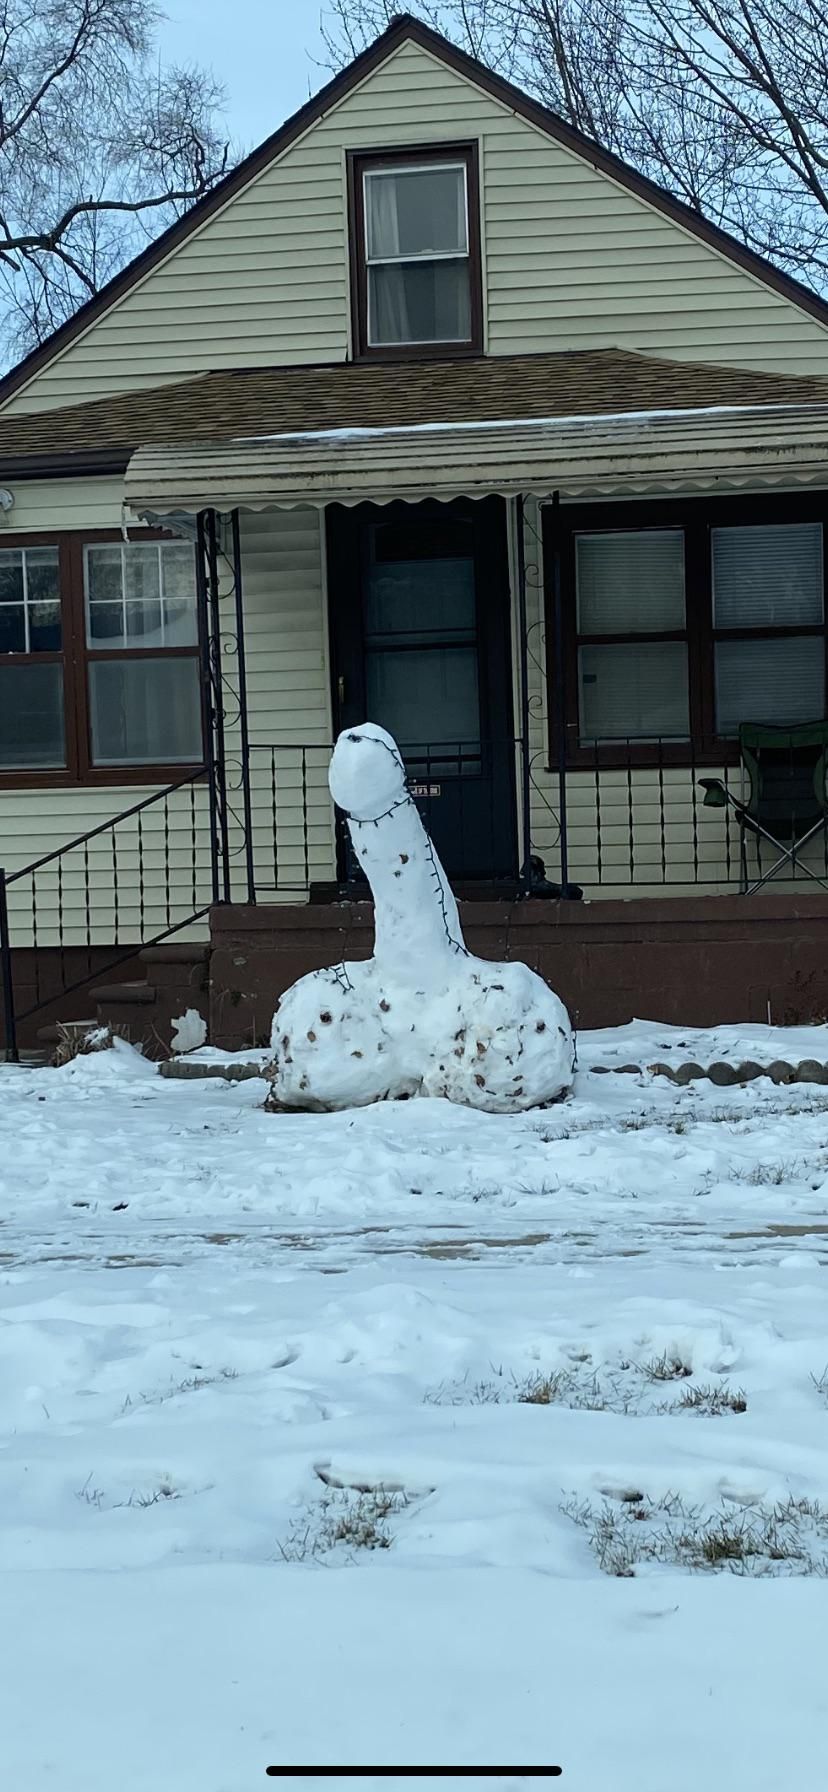 Looked like a shitty snowman from my house. Once I pulled down the street to go to work, I realized it’s a literal dick. Thanks, neighbors.